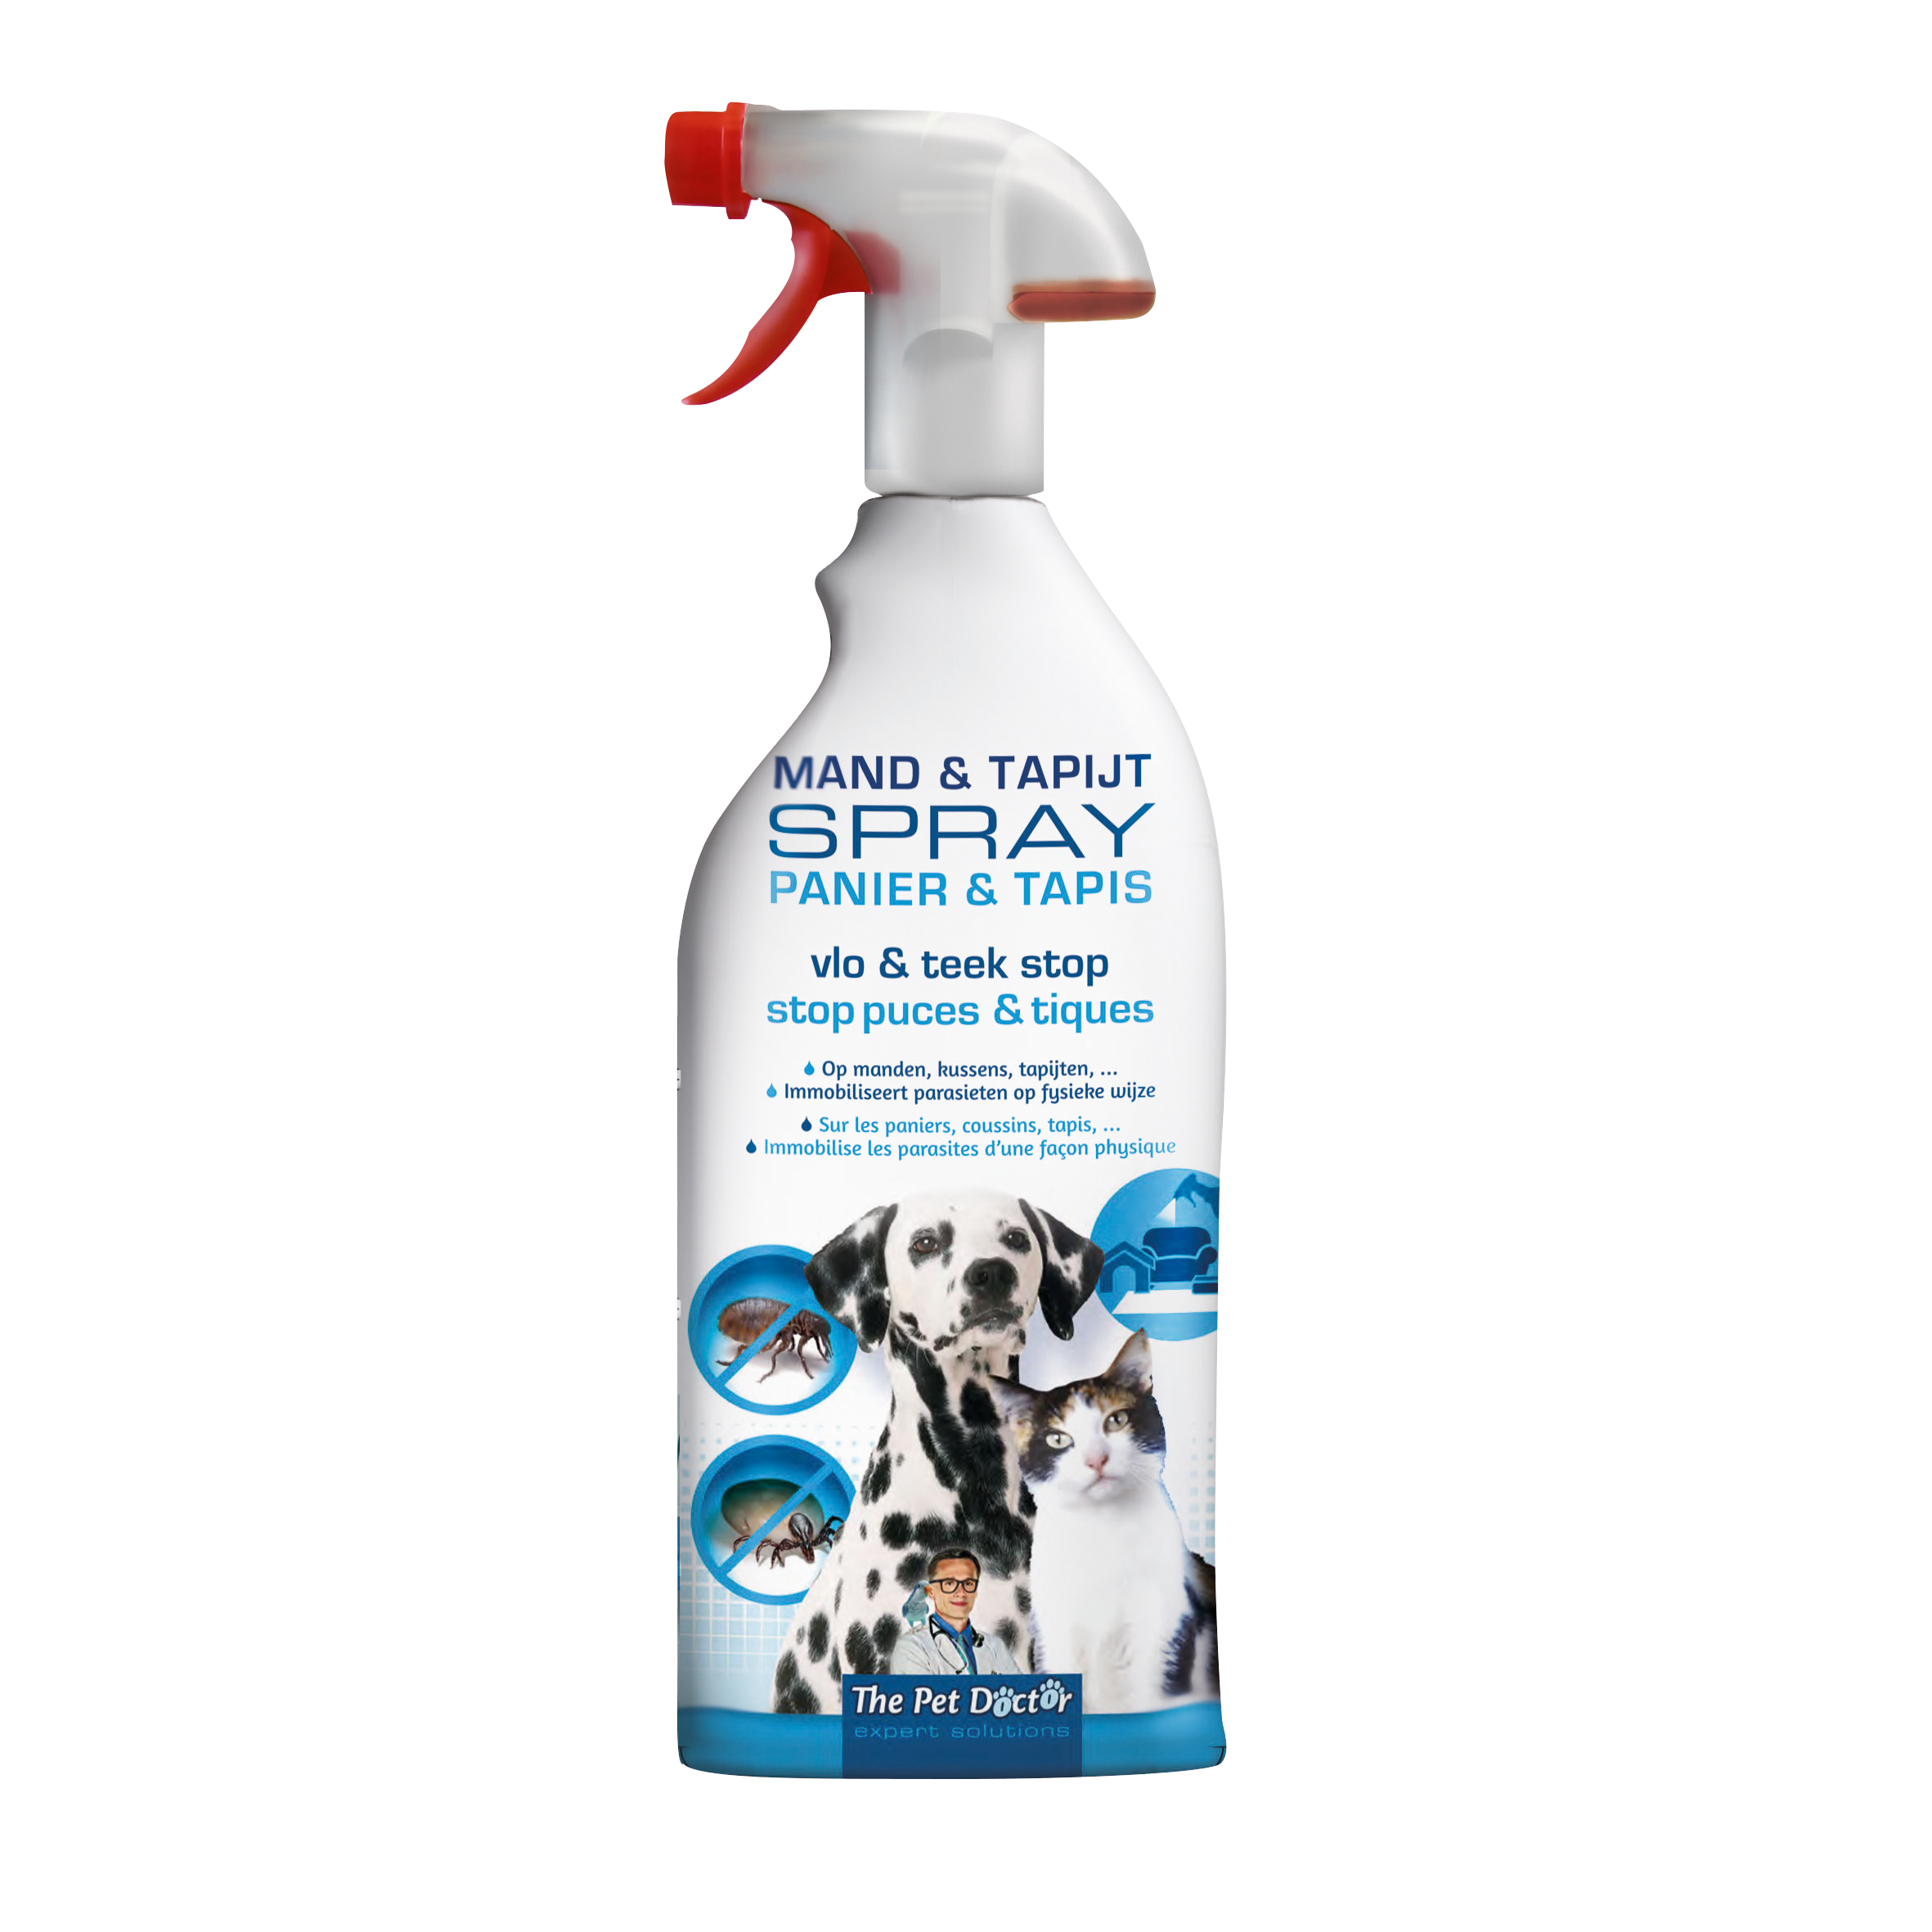 The Pet Doctor Stop Puces & Tiques Spray image